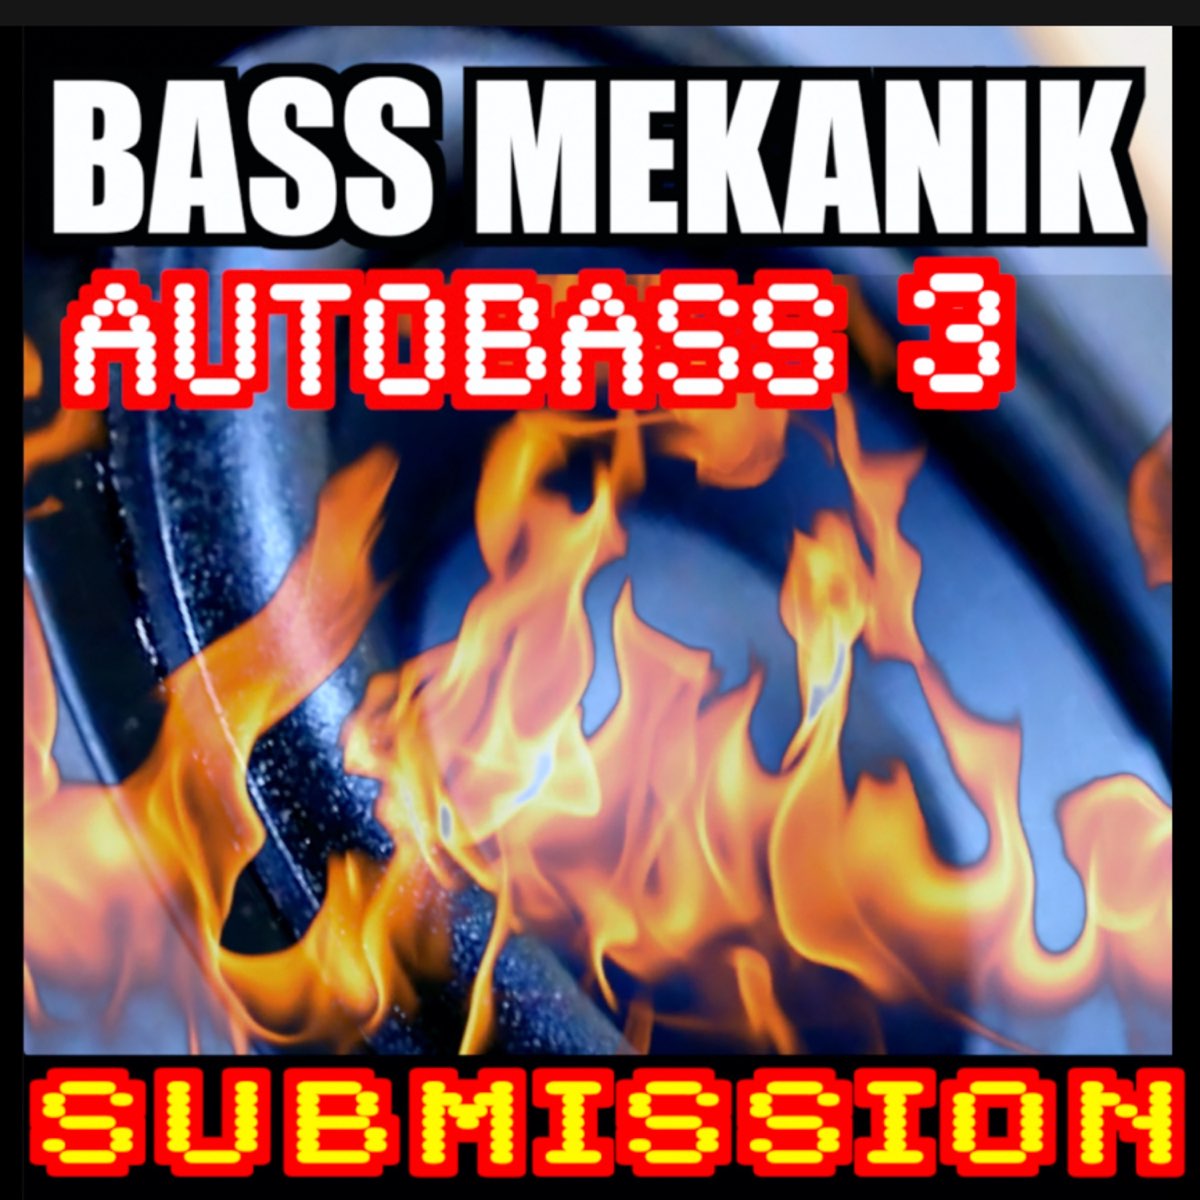 Autobass, Vol. 3: Submission - EP - Album by Bass Mekanik - Apple Music